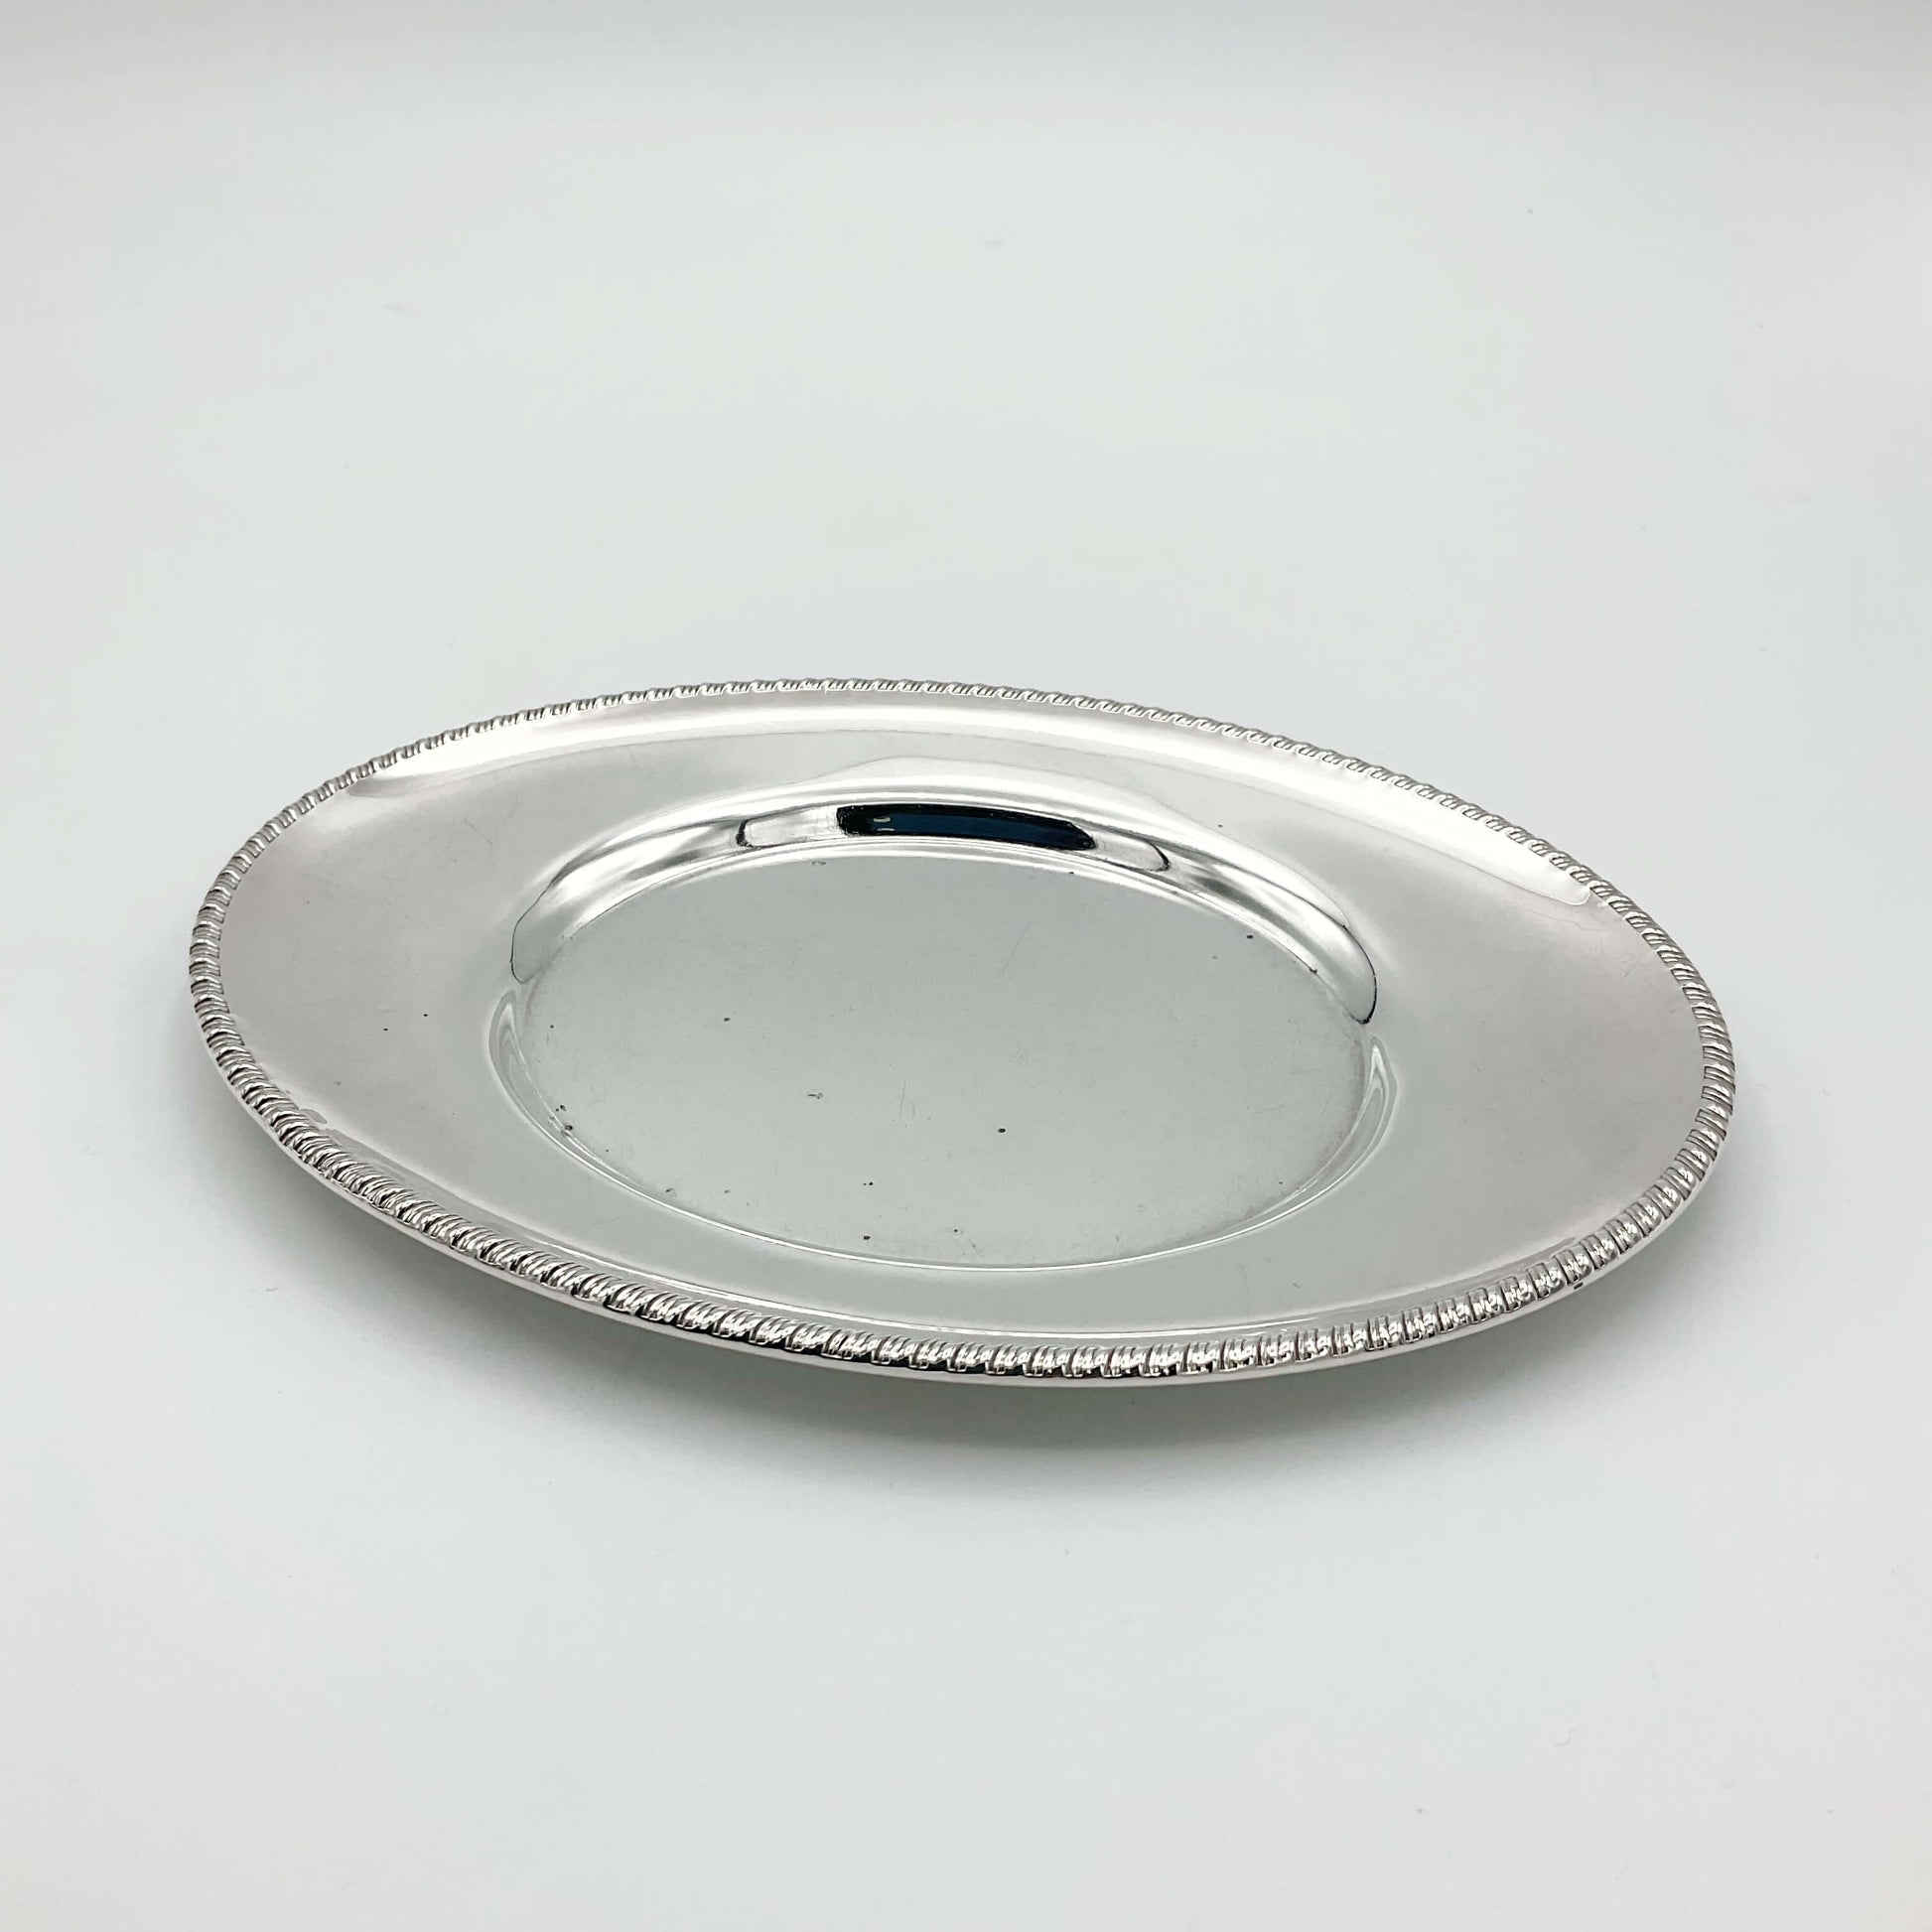 A beautiful shiny silver plated serving tray or platter on a white background